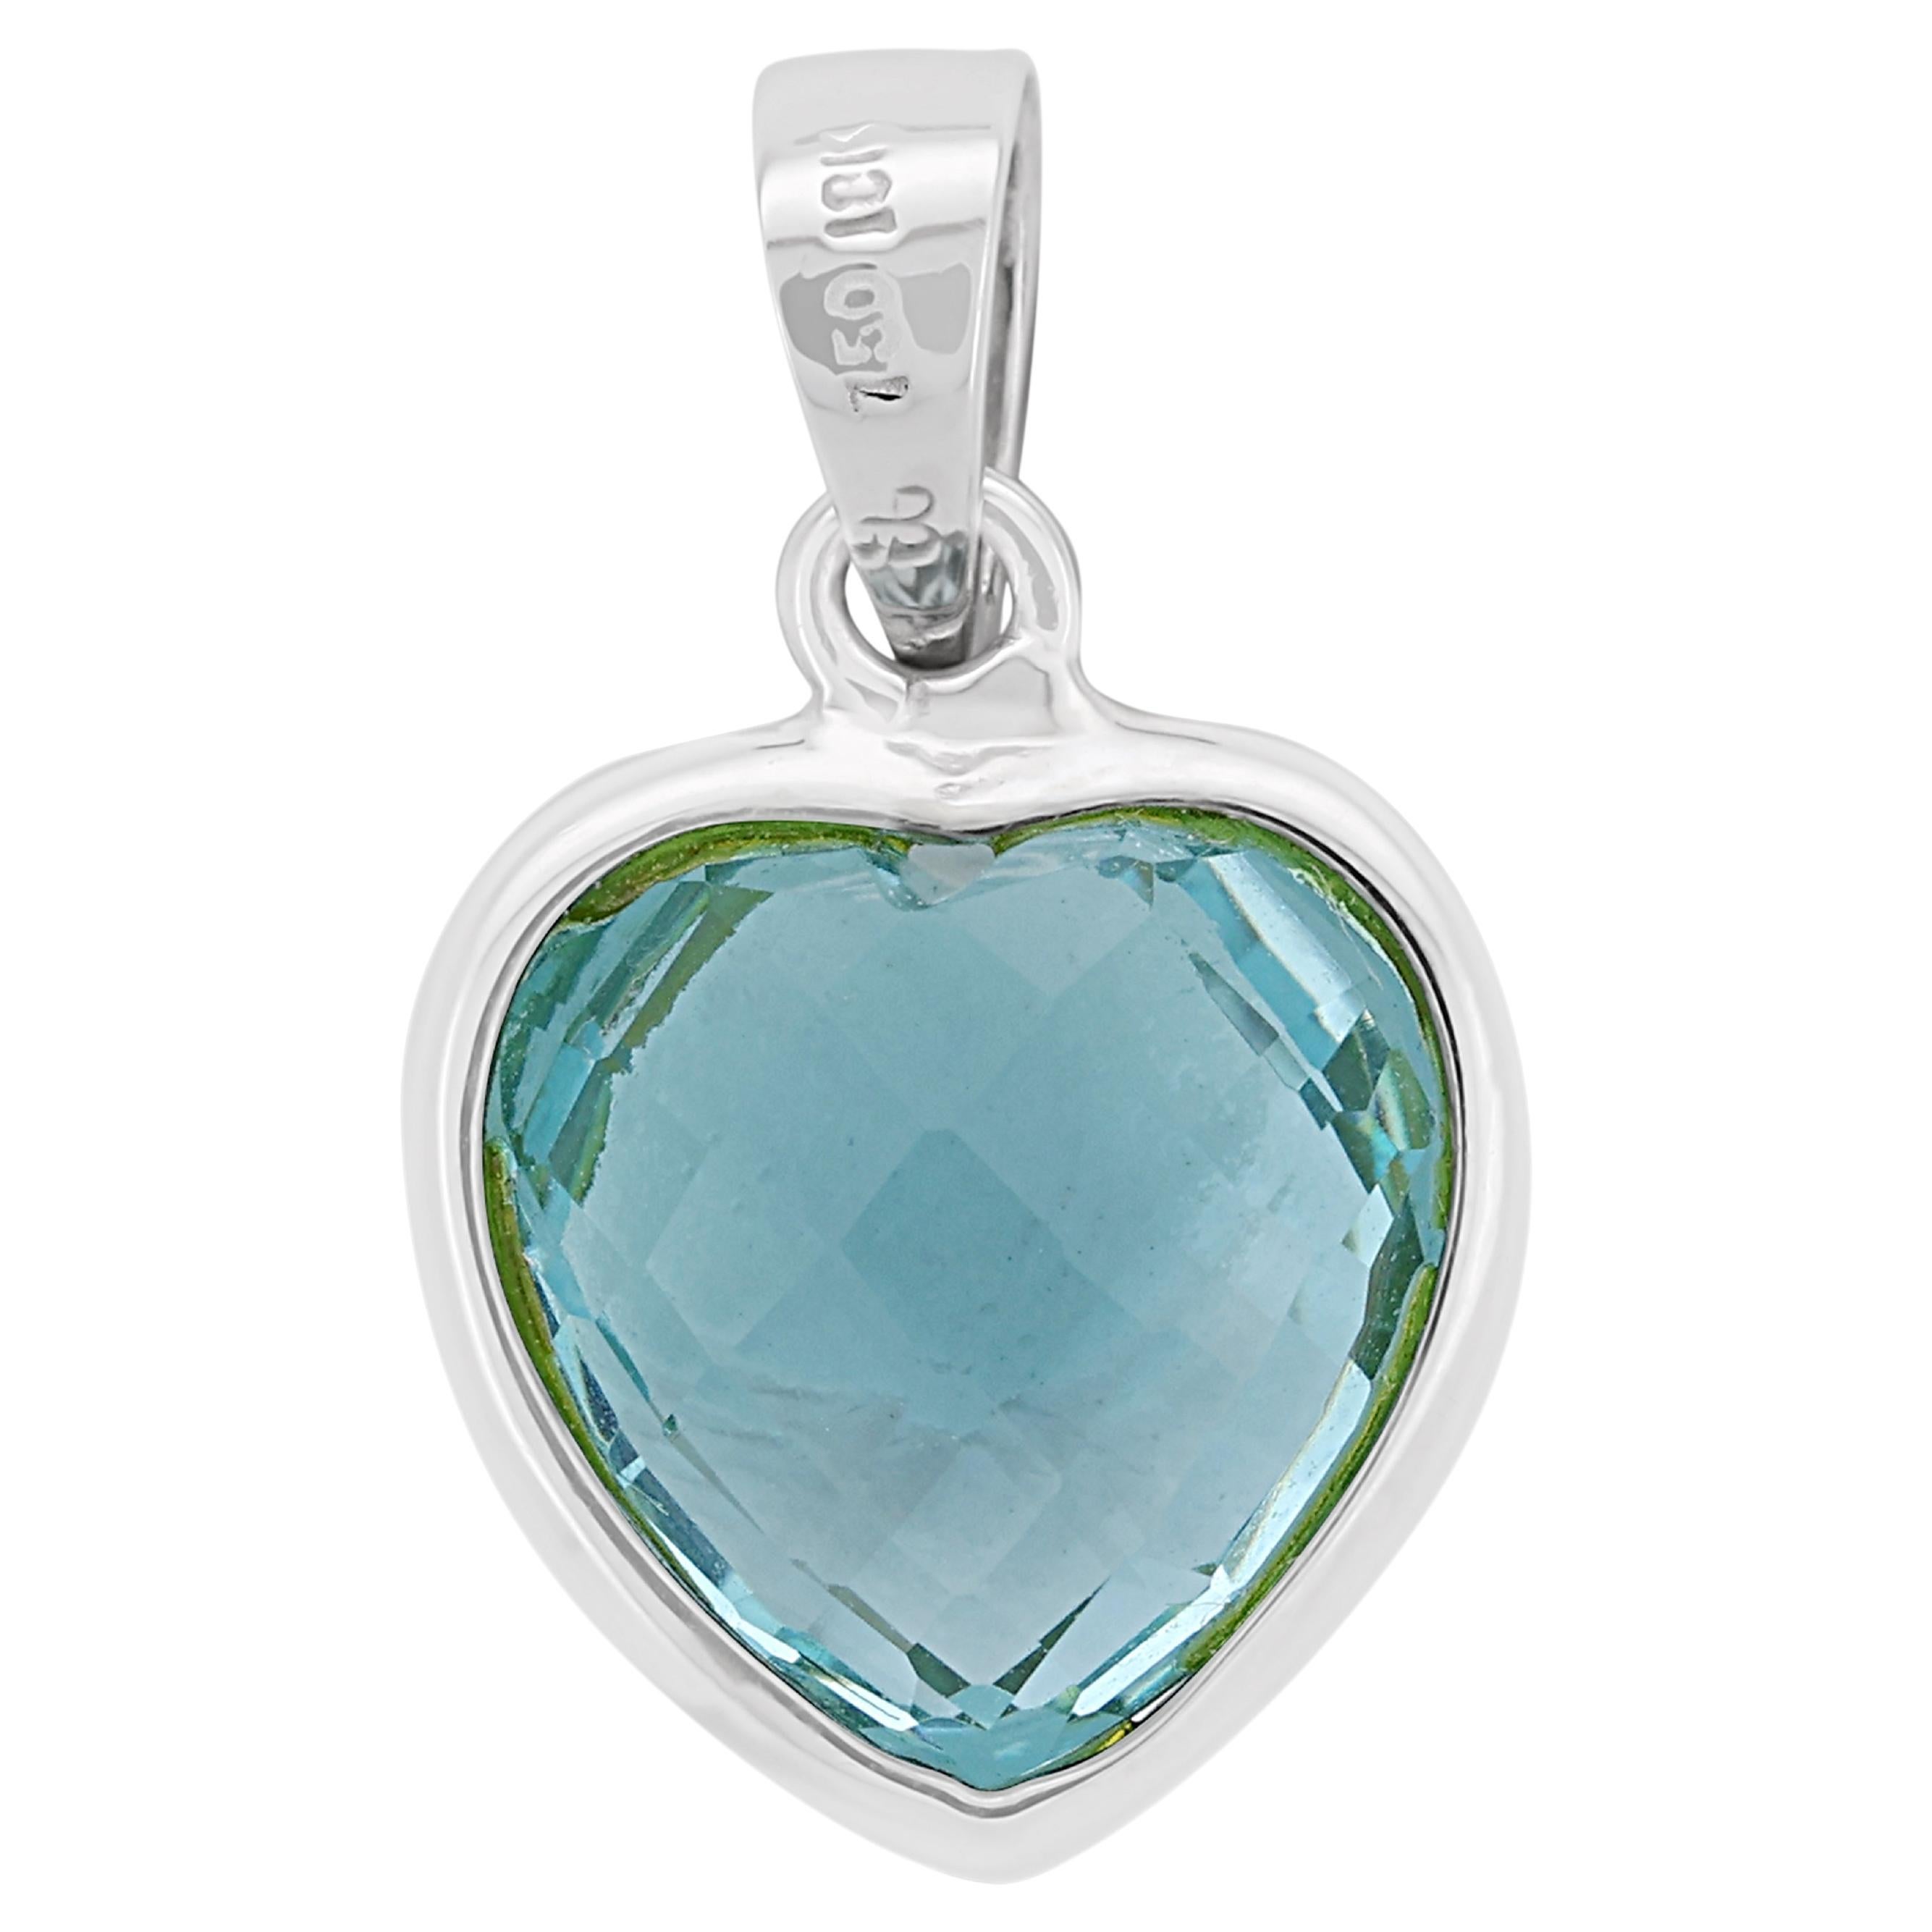 Fascinating 1.0ct Topaz Pendant 18K White Gold - (Chain not Included) For Sale 2